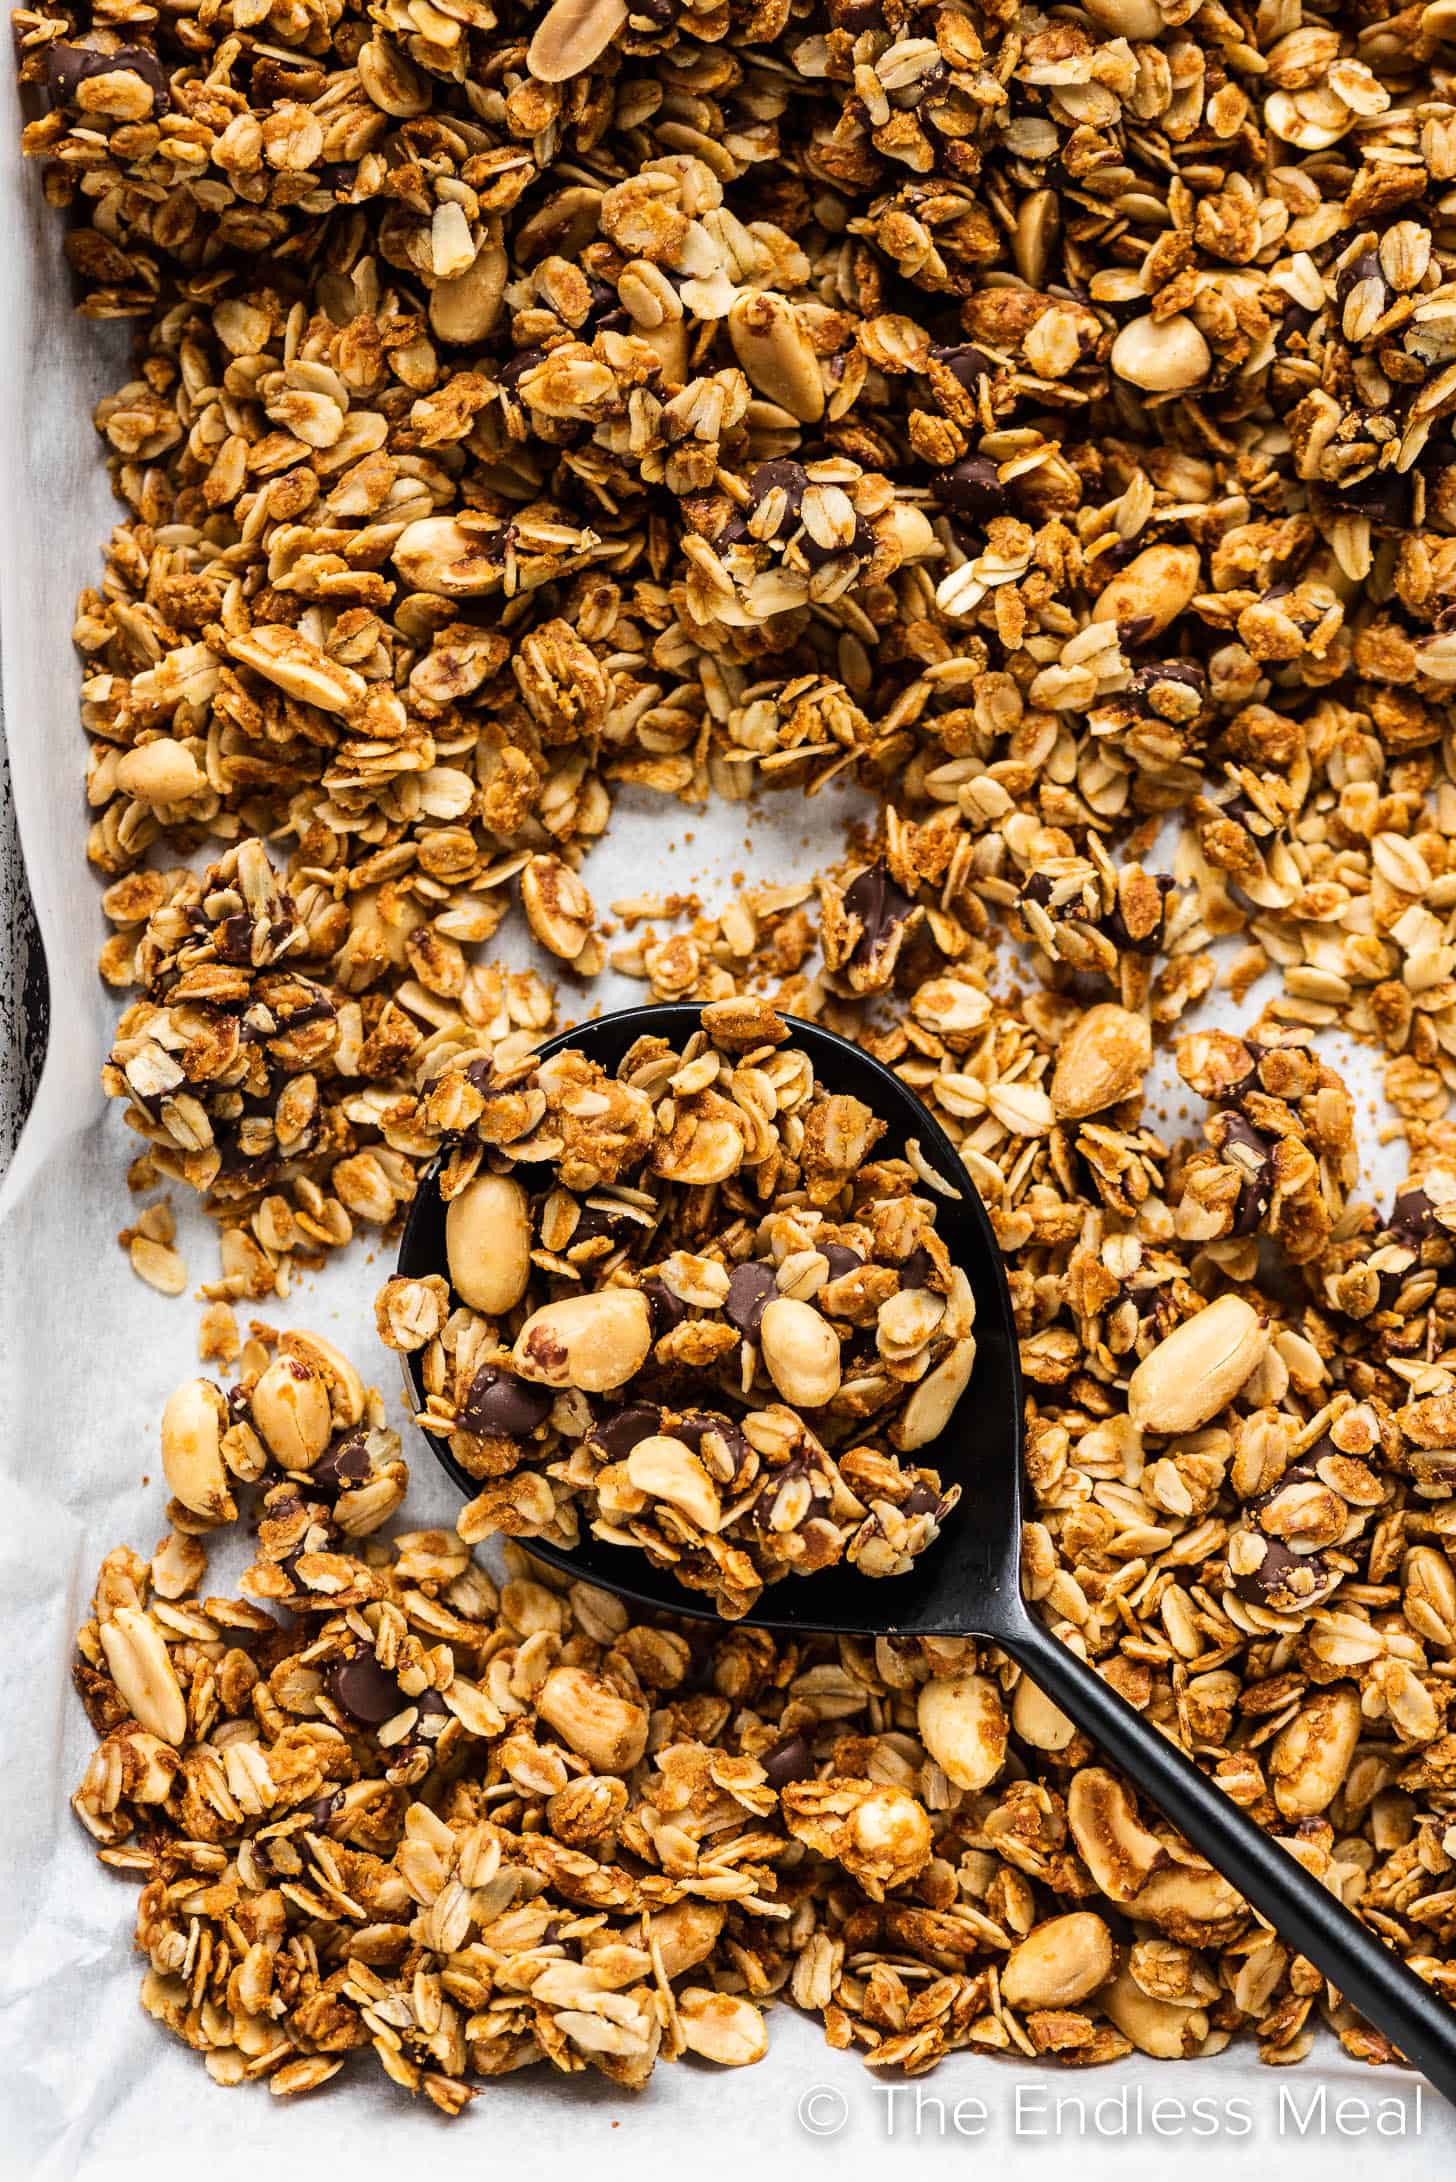 Peanut Butter Granola on a baking tray